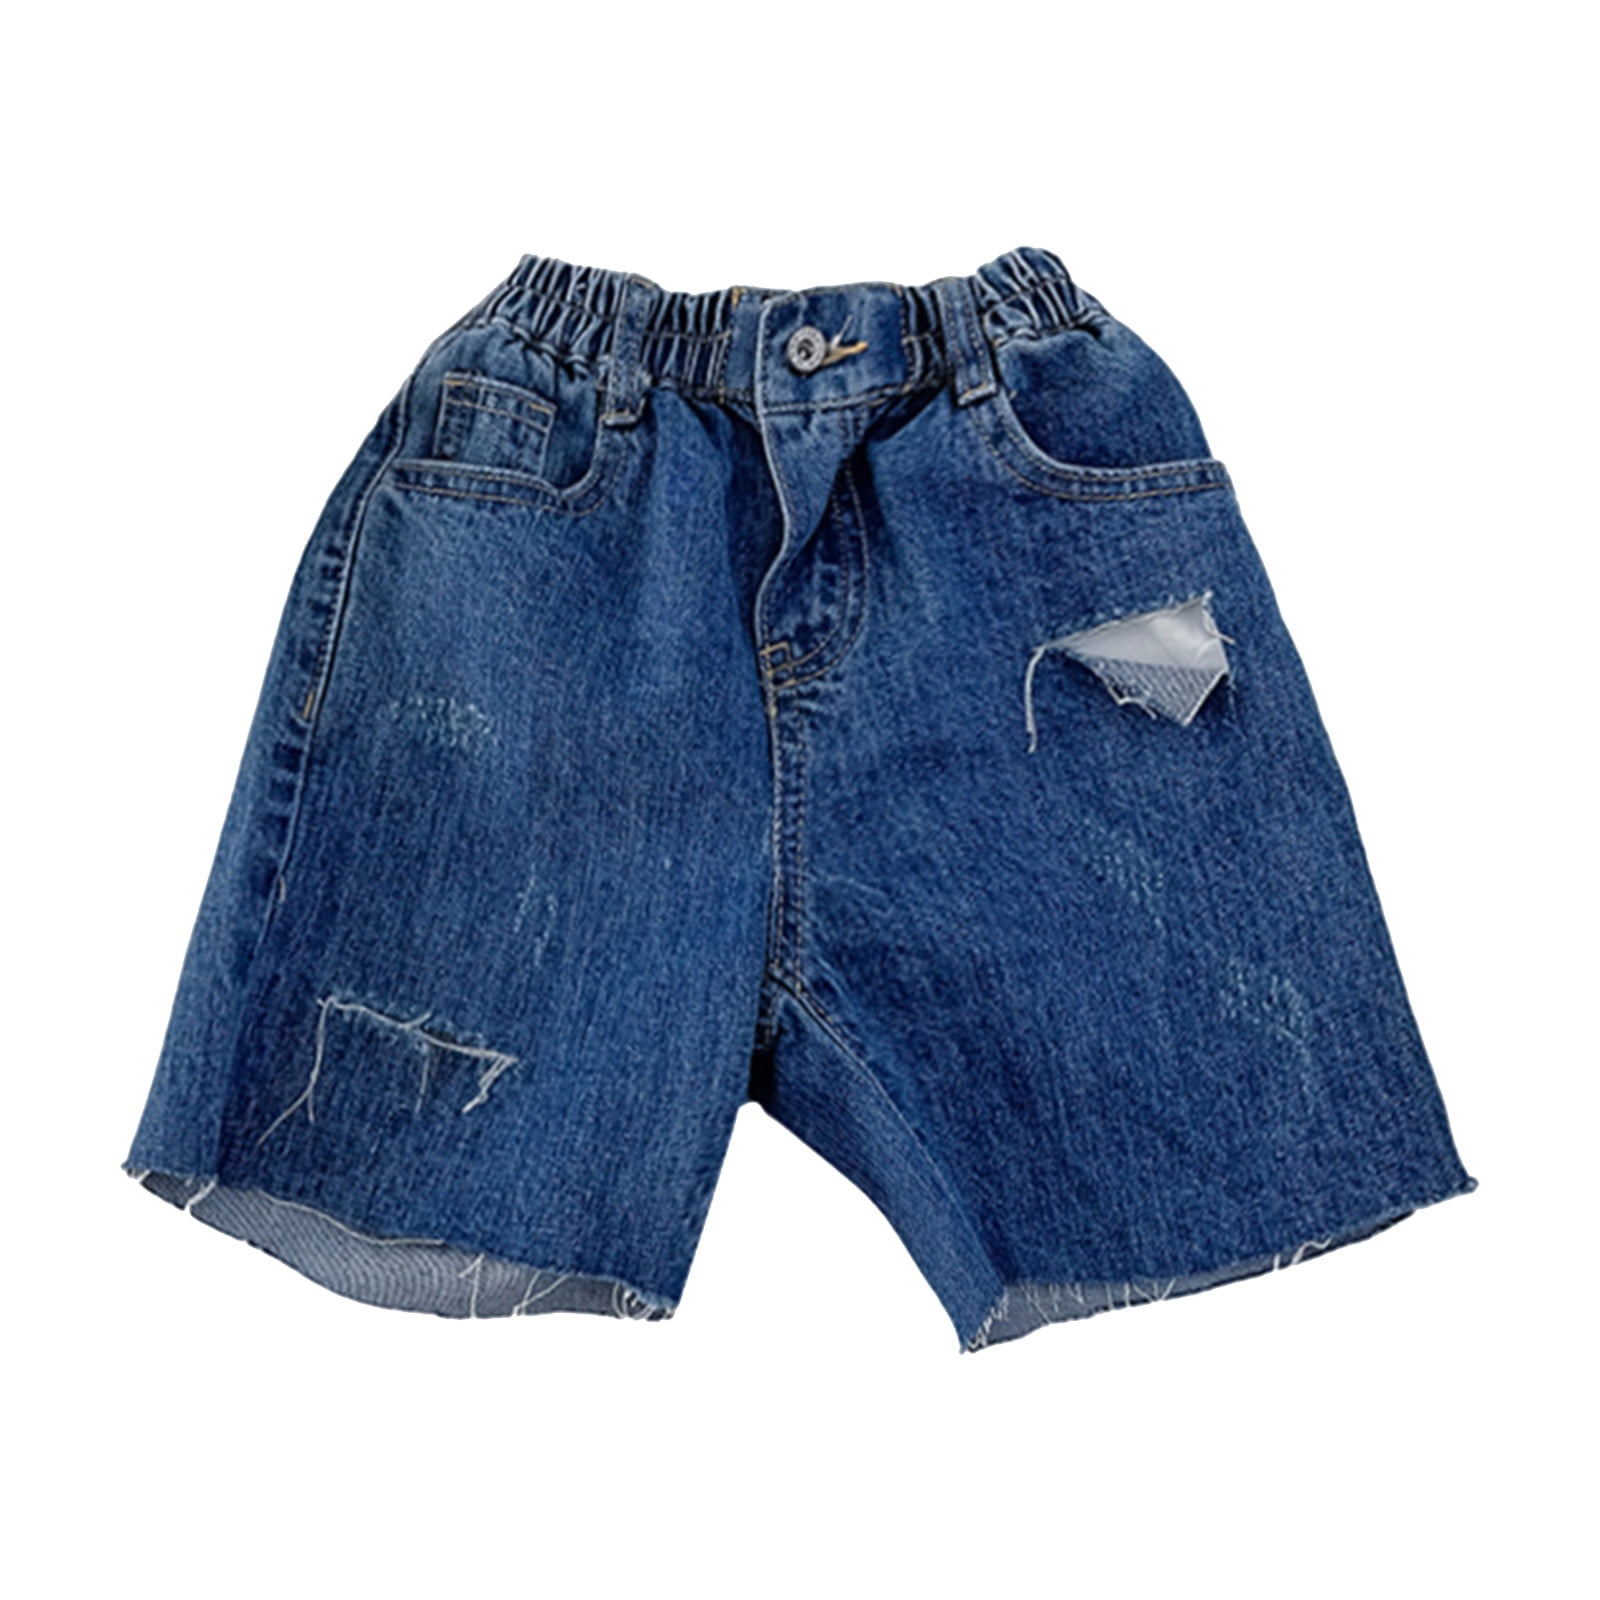 SXcggal The Children's Baby Boys Girls Toddler Chambray Jeans Pants ...